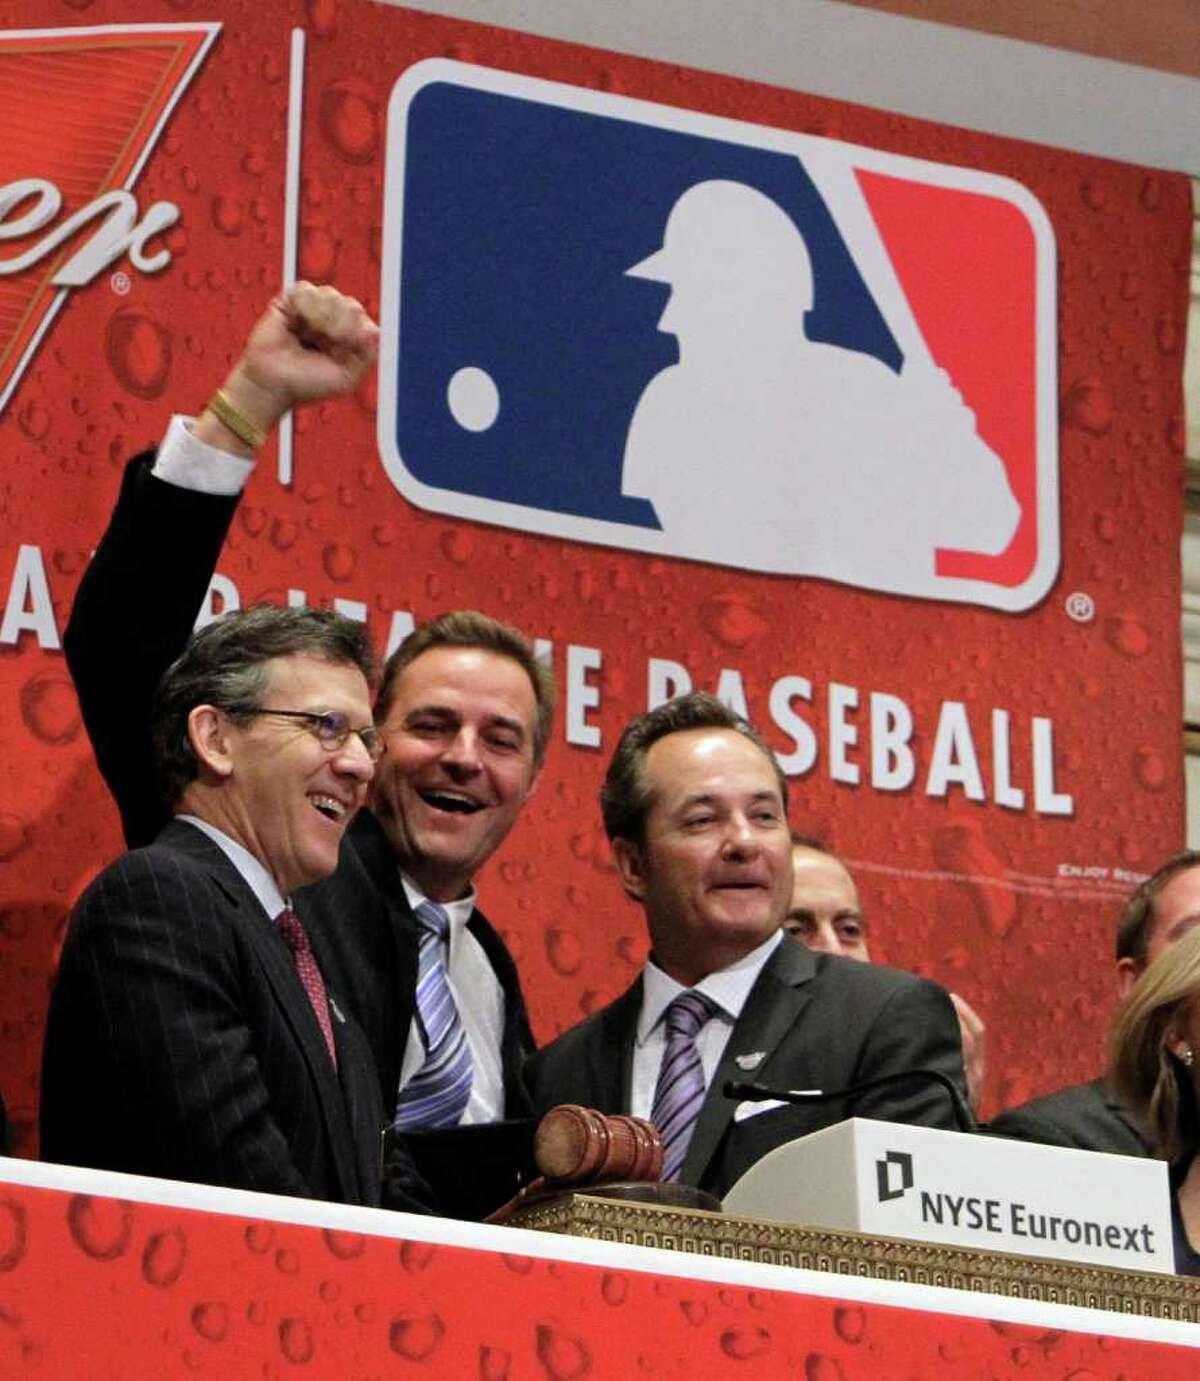 Tim Brosnan, left, with Major League Baseball, former major league pitcher Al Leiter, center, and Mark Wright, with Budweiser, ring the opening bell of the New York Stock Exchange in observance of baseball's opening day, Thursday, March 31, 2011.